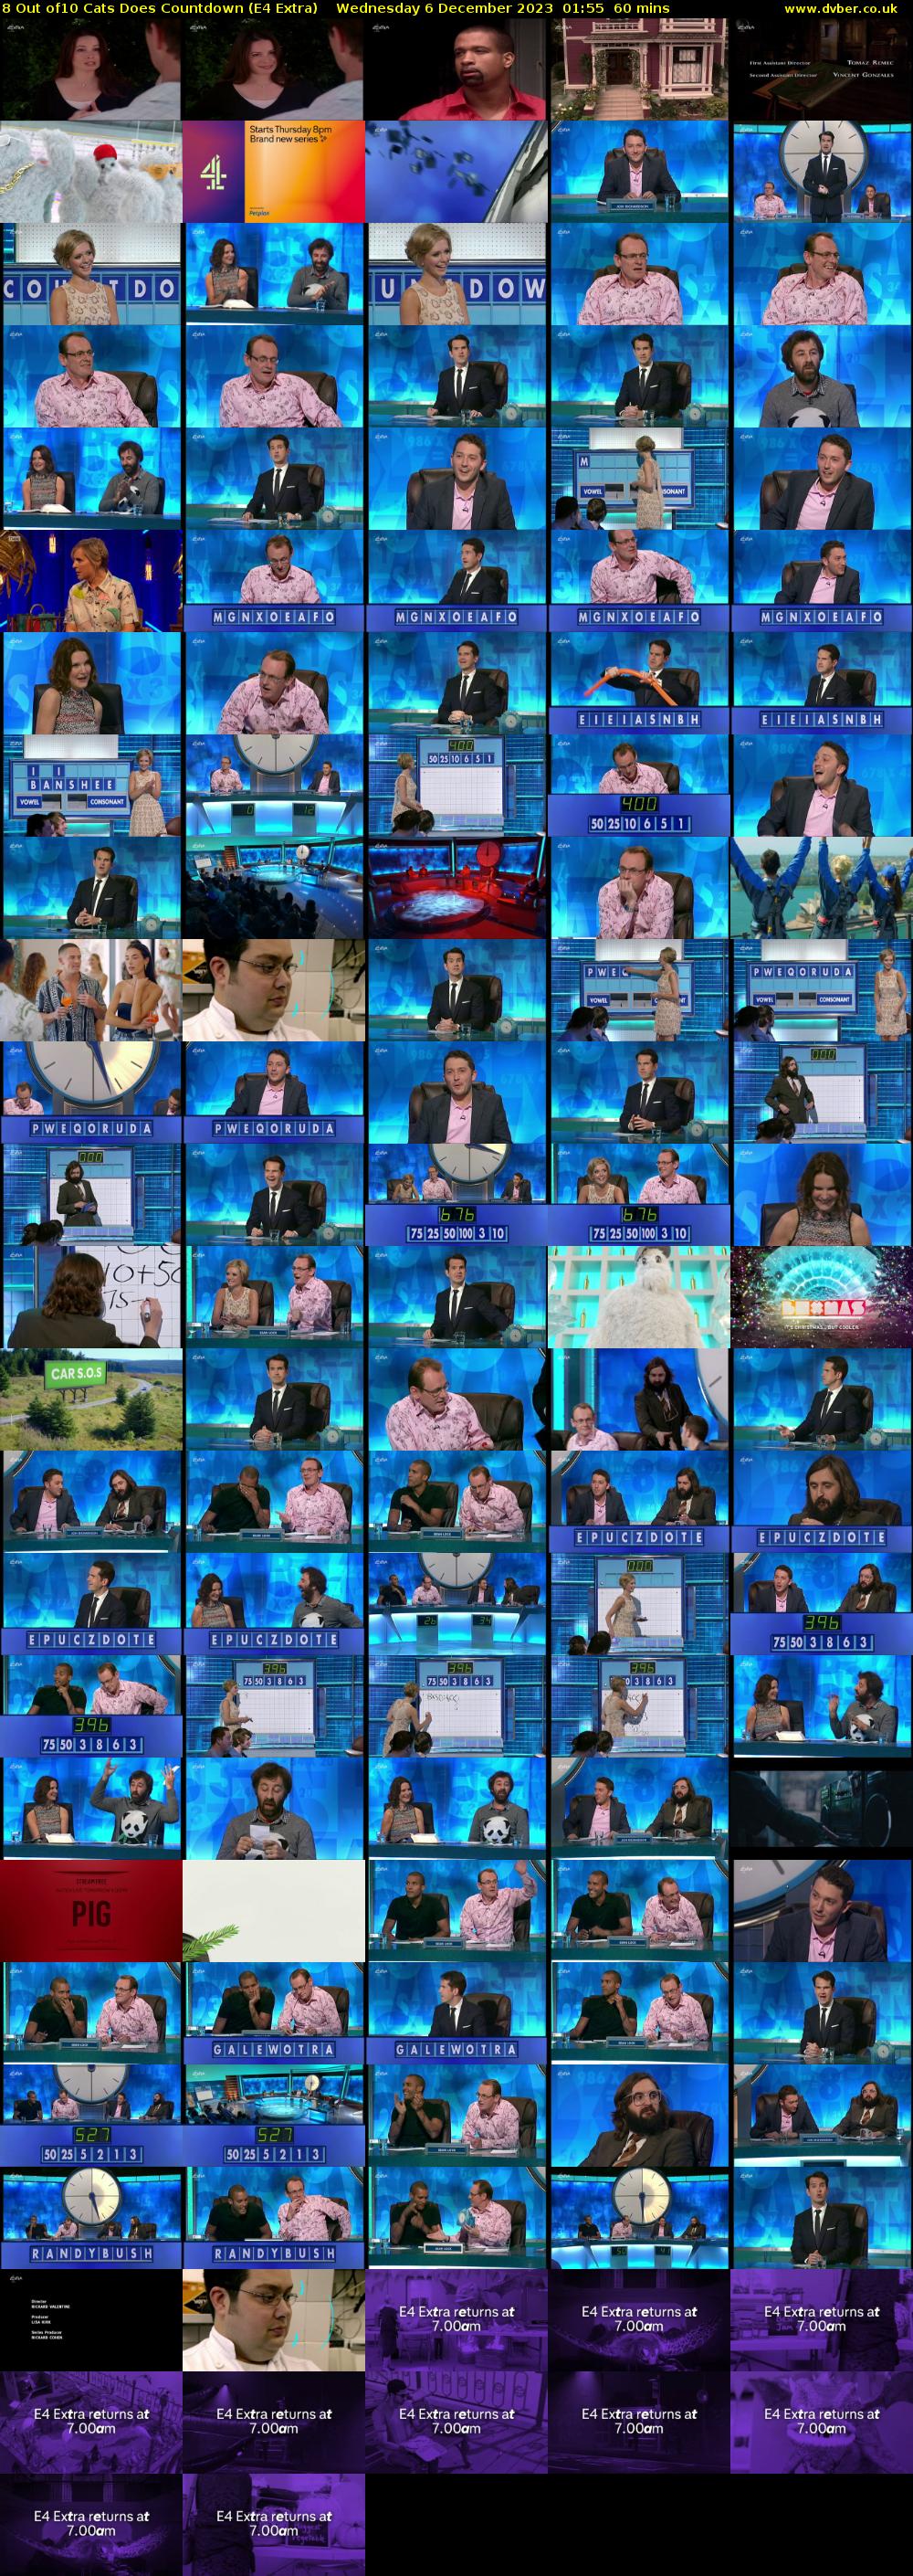 8 Out of10 Cats Does Countdown (E4 Extra) Wednesday 6 December 2023 01:55 - 02:55